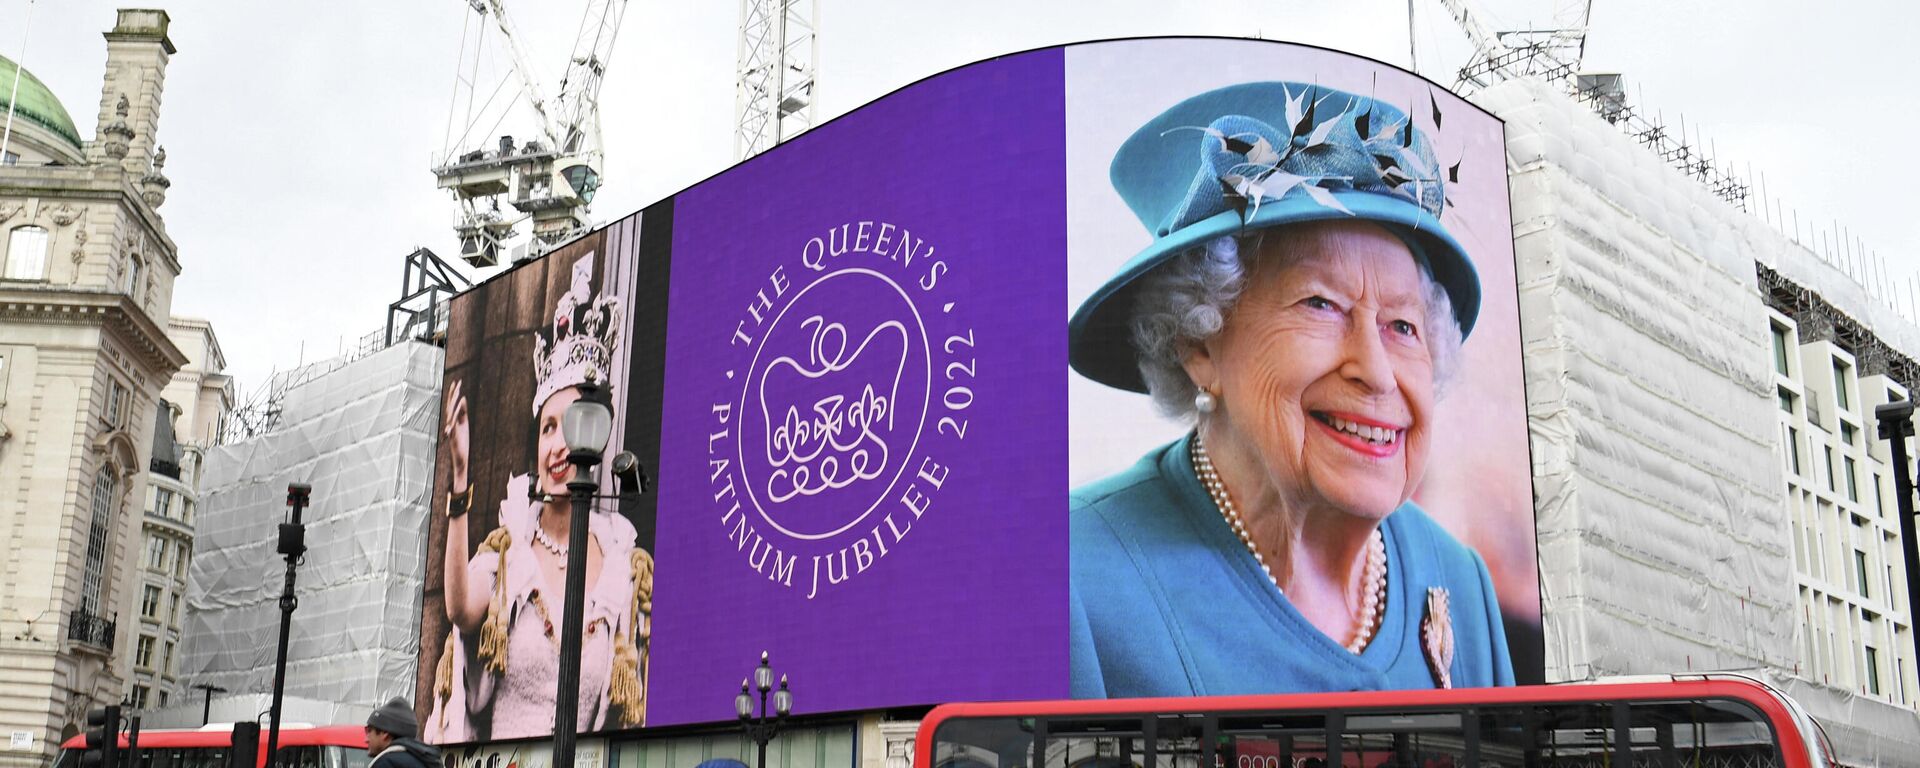 Red London buses pass by, as images of Britain's Queen Elizabeth II are displayed on the big digital screens at Piccadilly Circus in central London on February 6, 2022, to mark the start of Her Majesty's Platinum Jubilee Year - Sputnik International, 1920, 23.02.2022